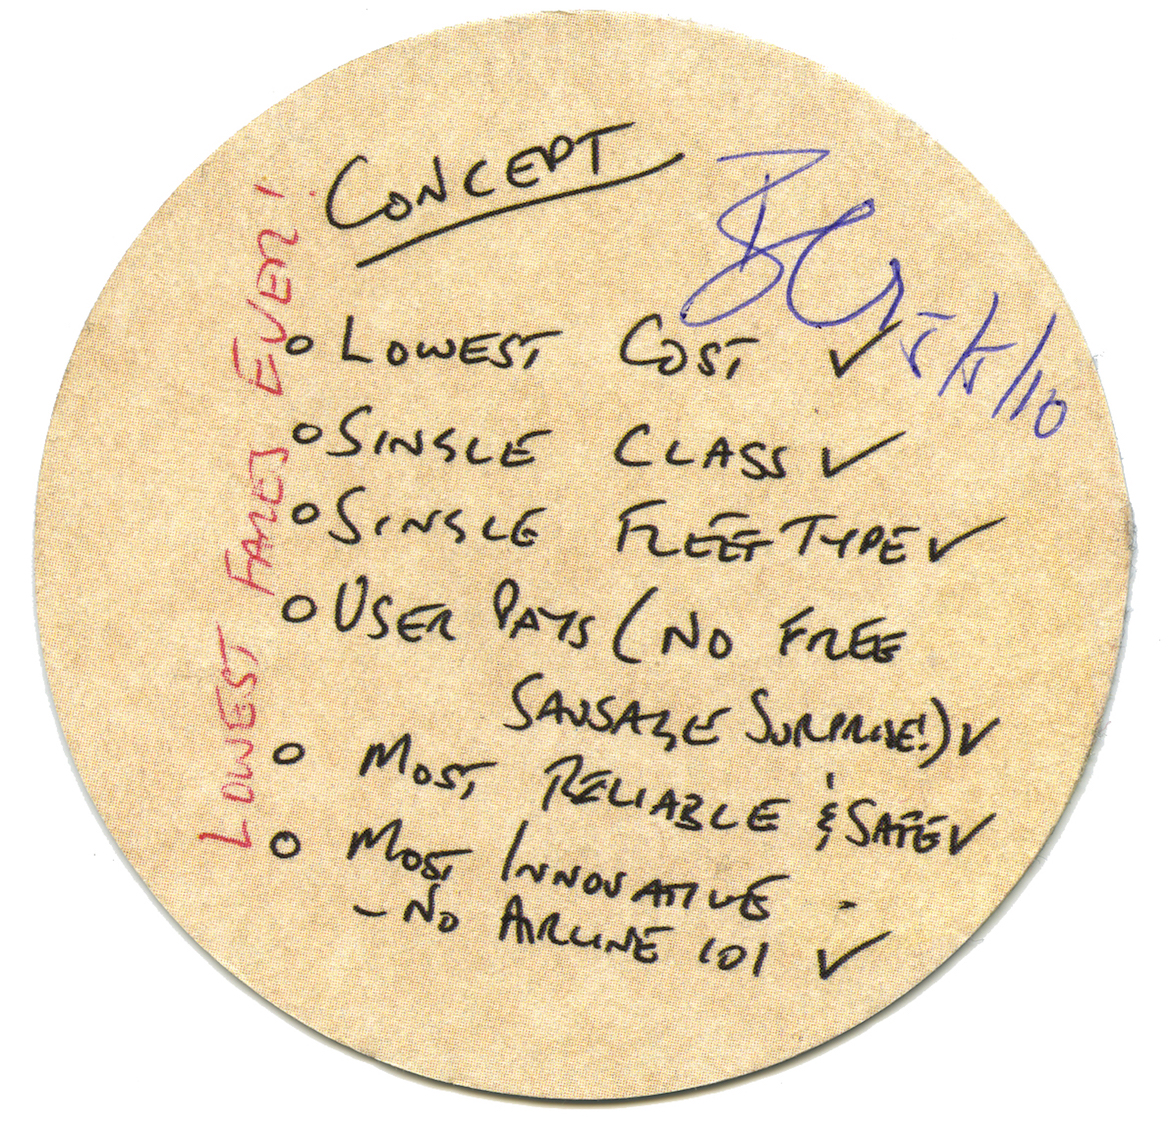 Business plan – Brett Godfrey famously mapped out the original Virgin Blue concept on beer coasters. This replica coaster, which Godfrey has initialled, was reproduced for his May 5 farewell function.